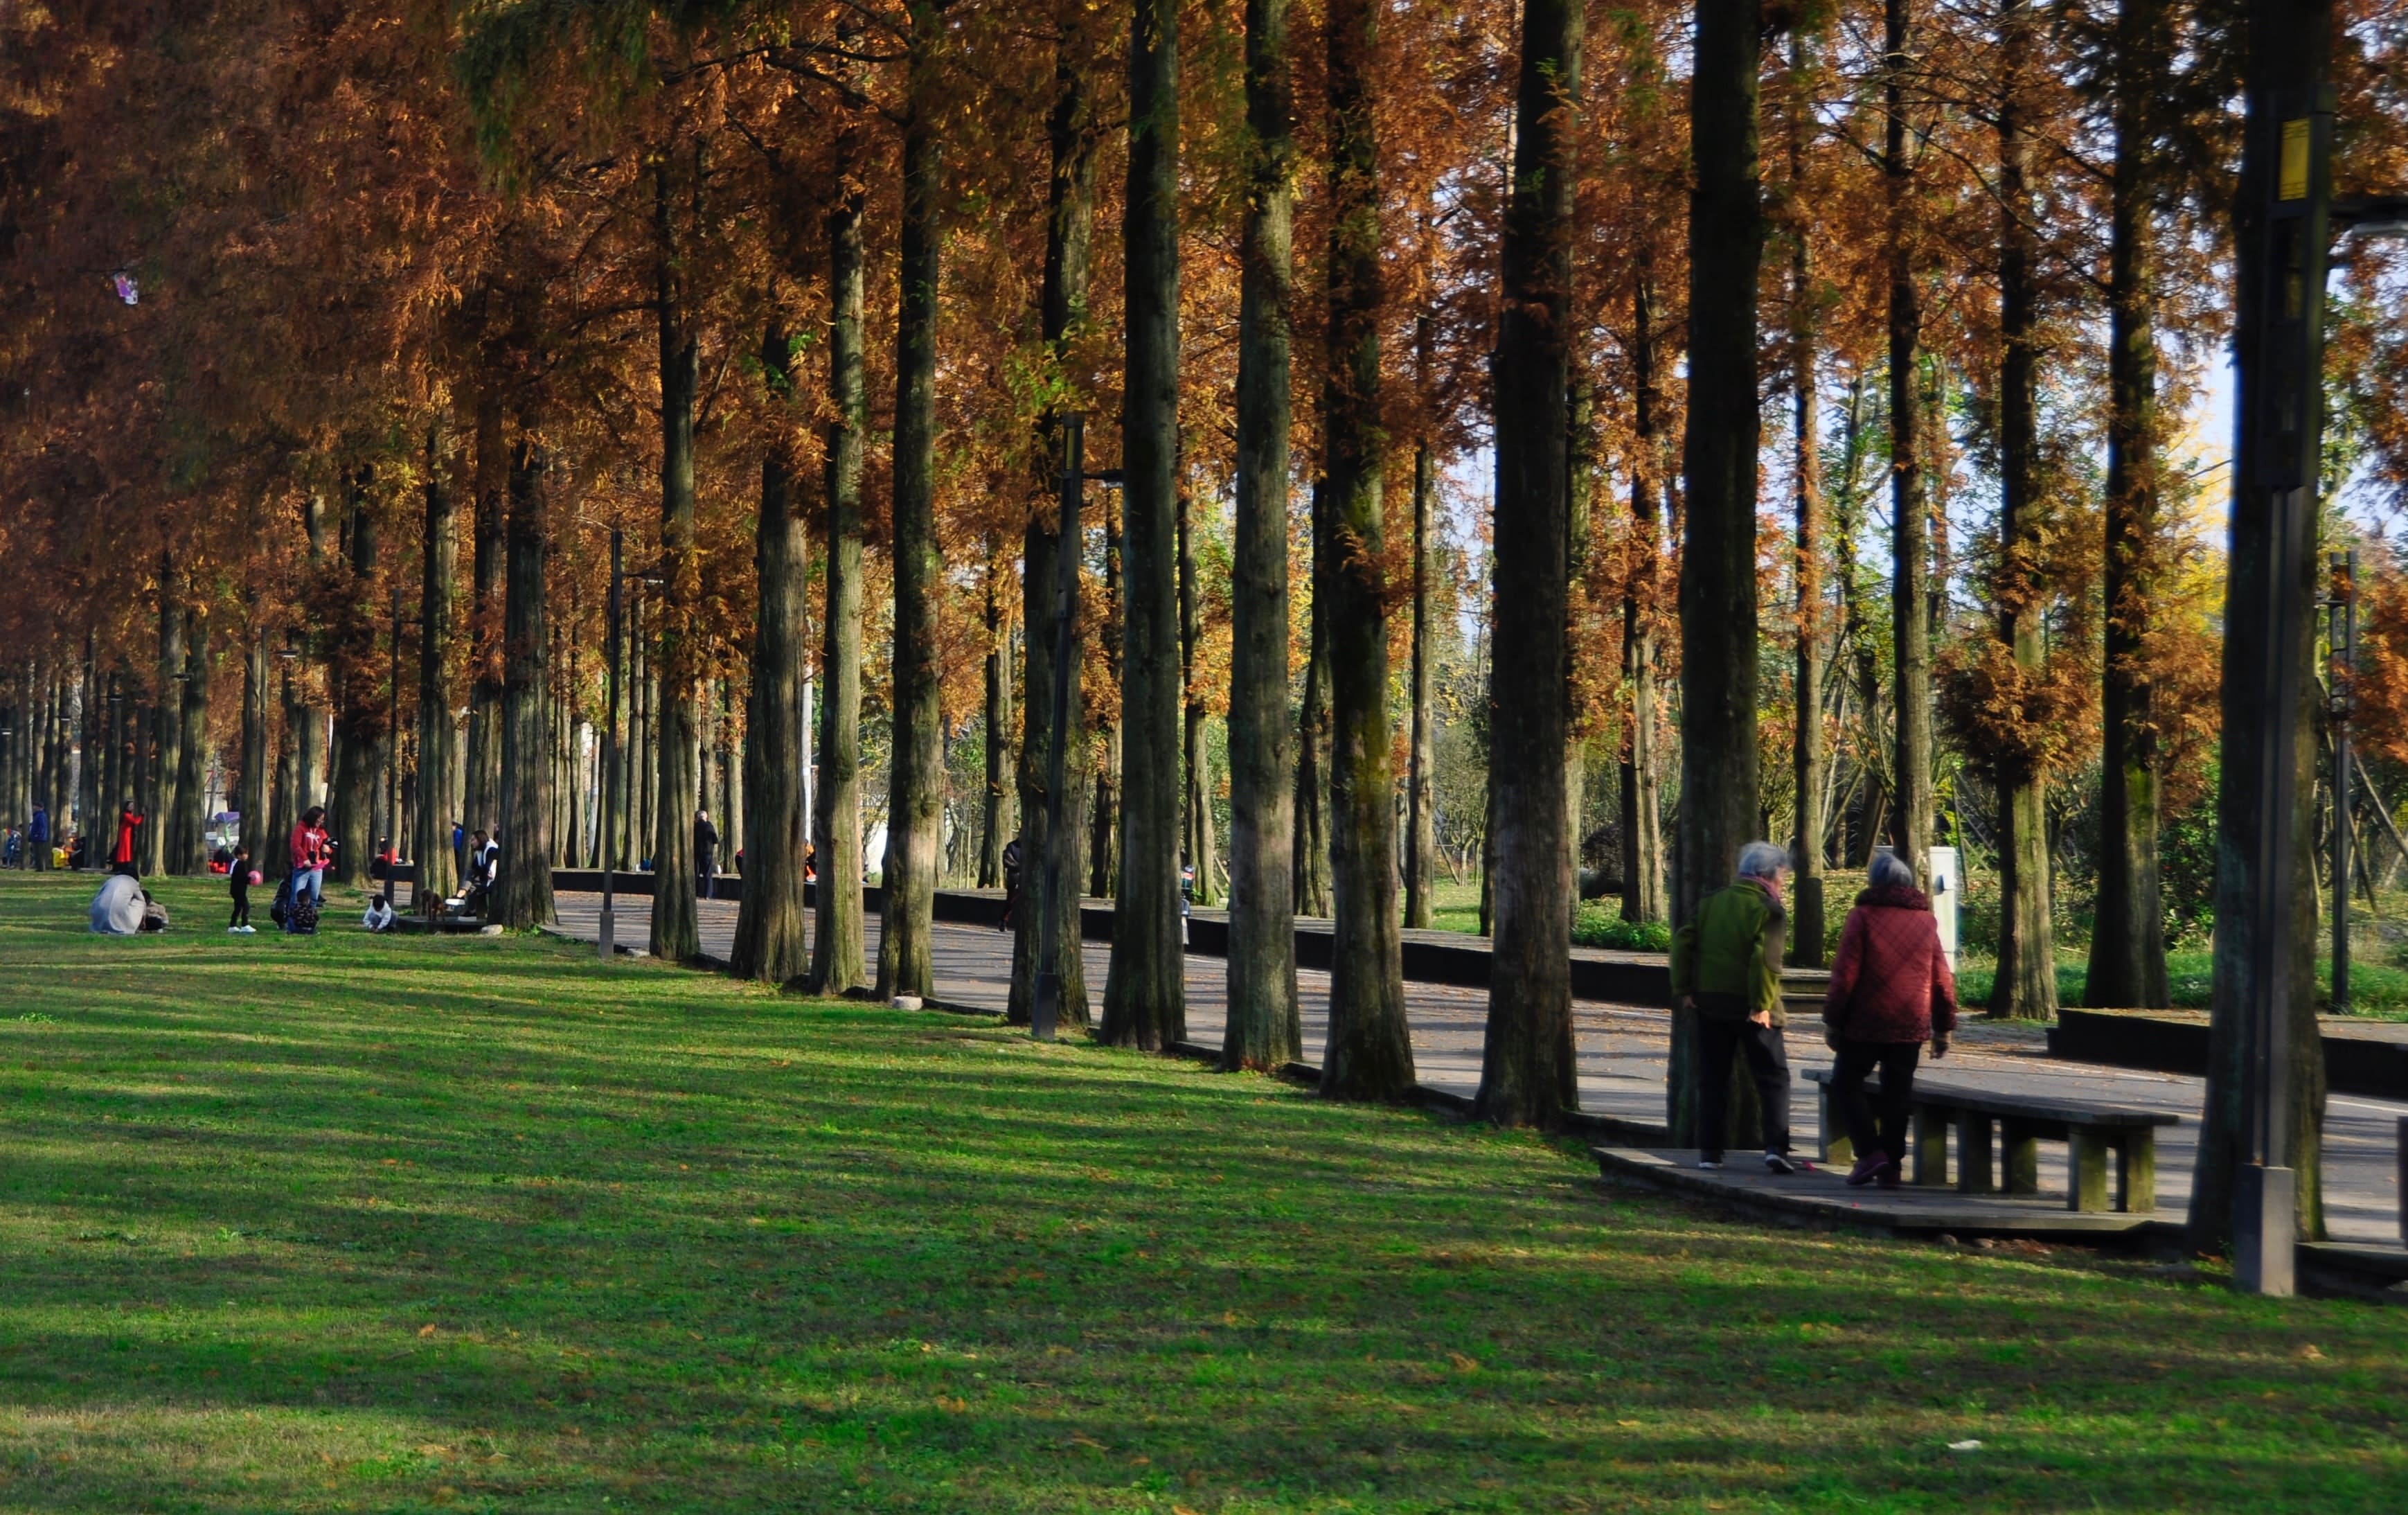 Park with trees along a pathway